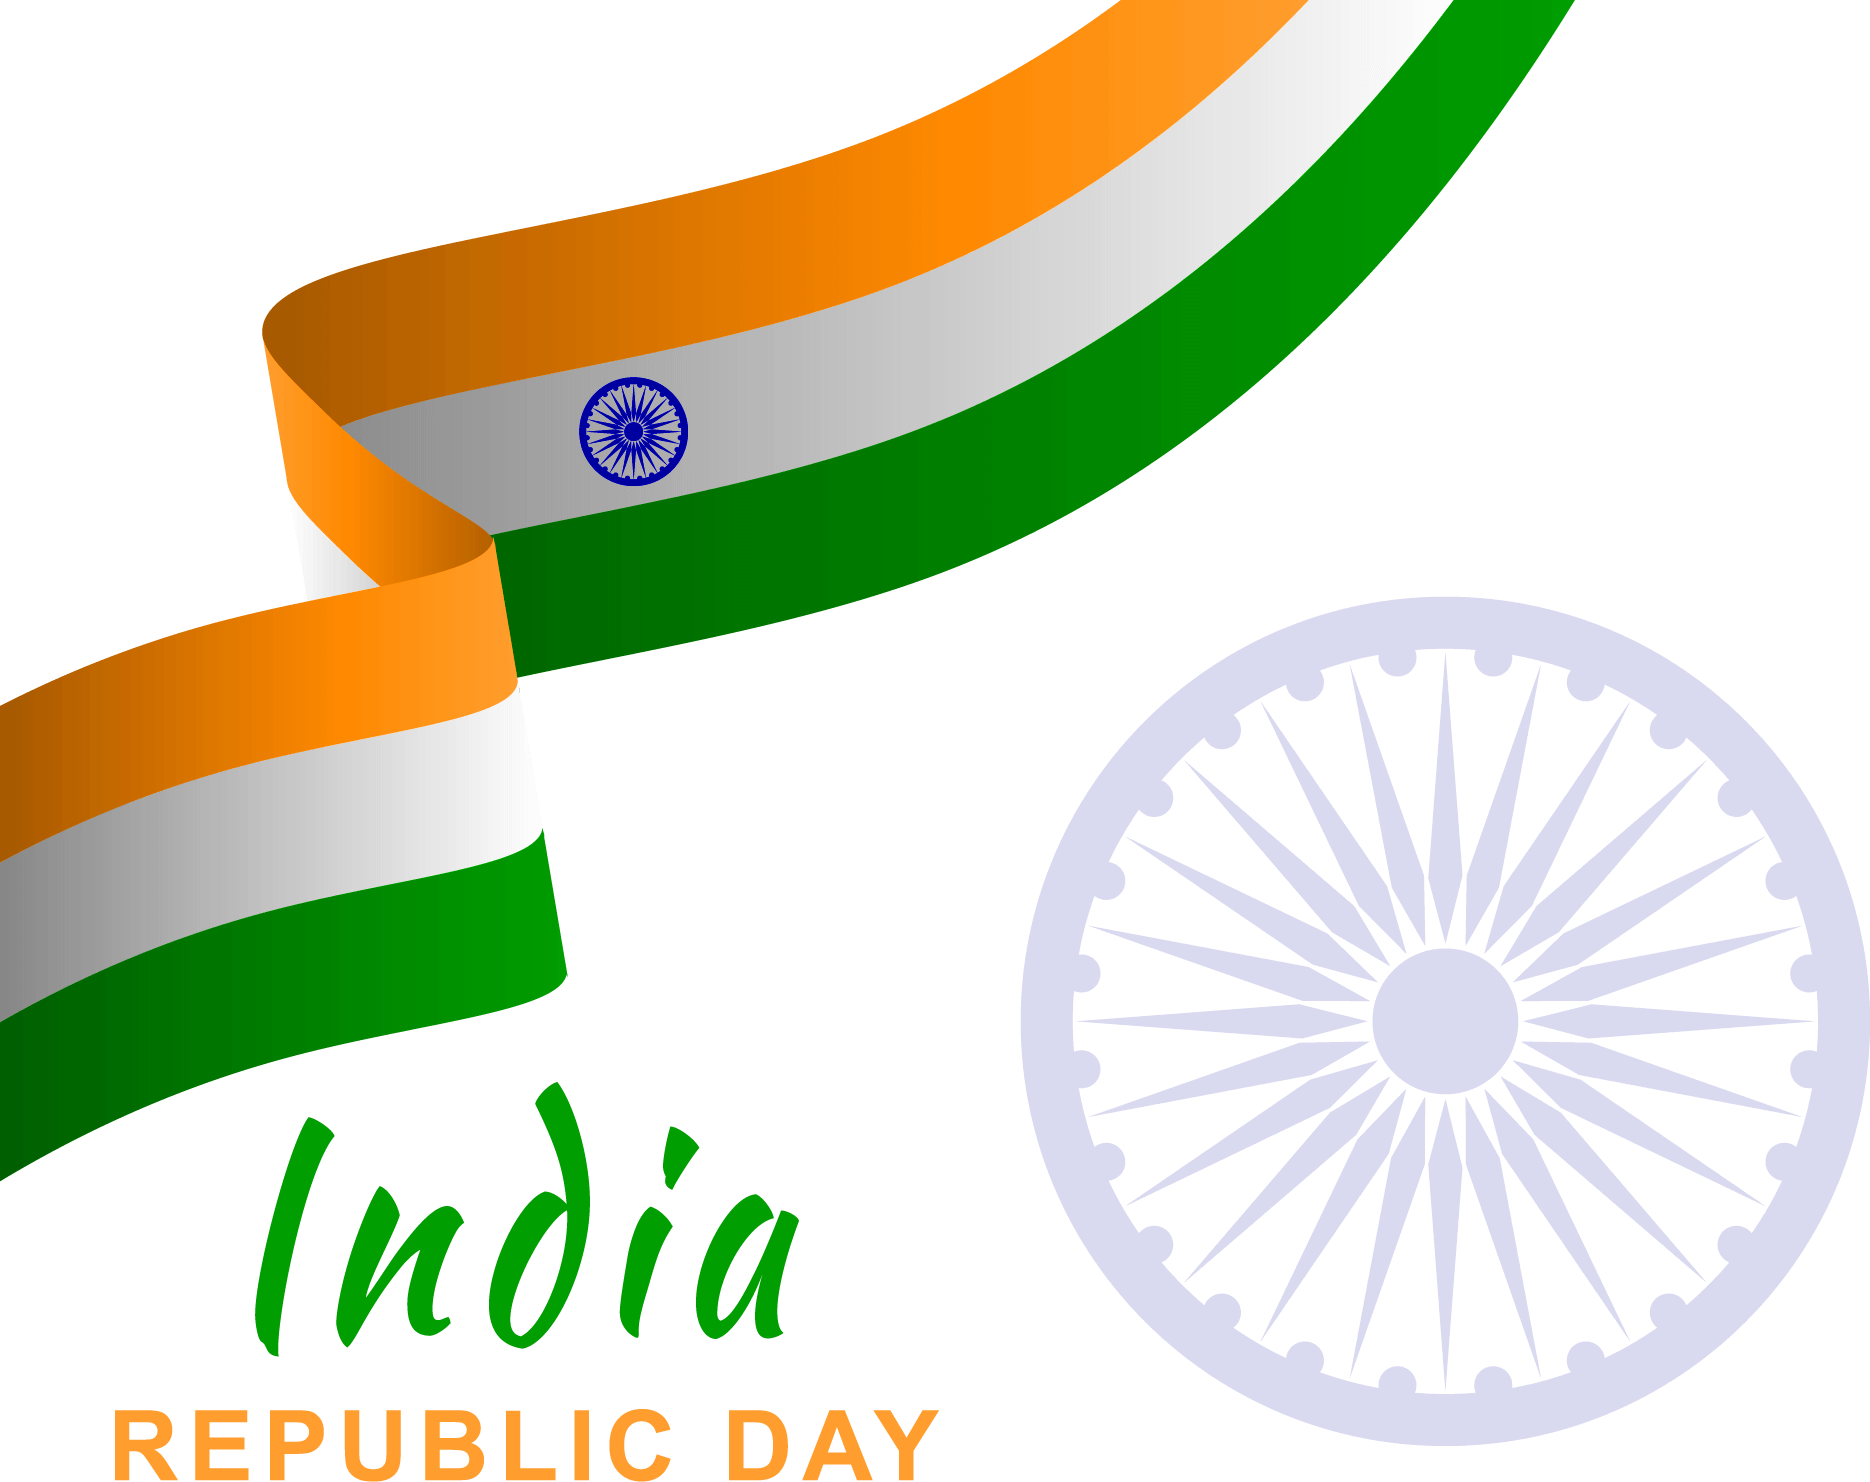 Indian flag vector png happy republic day - Pngfreepic